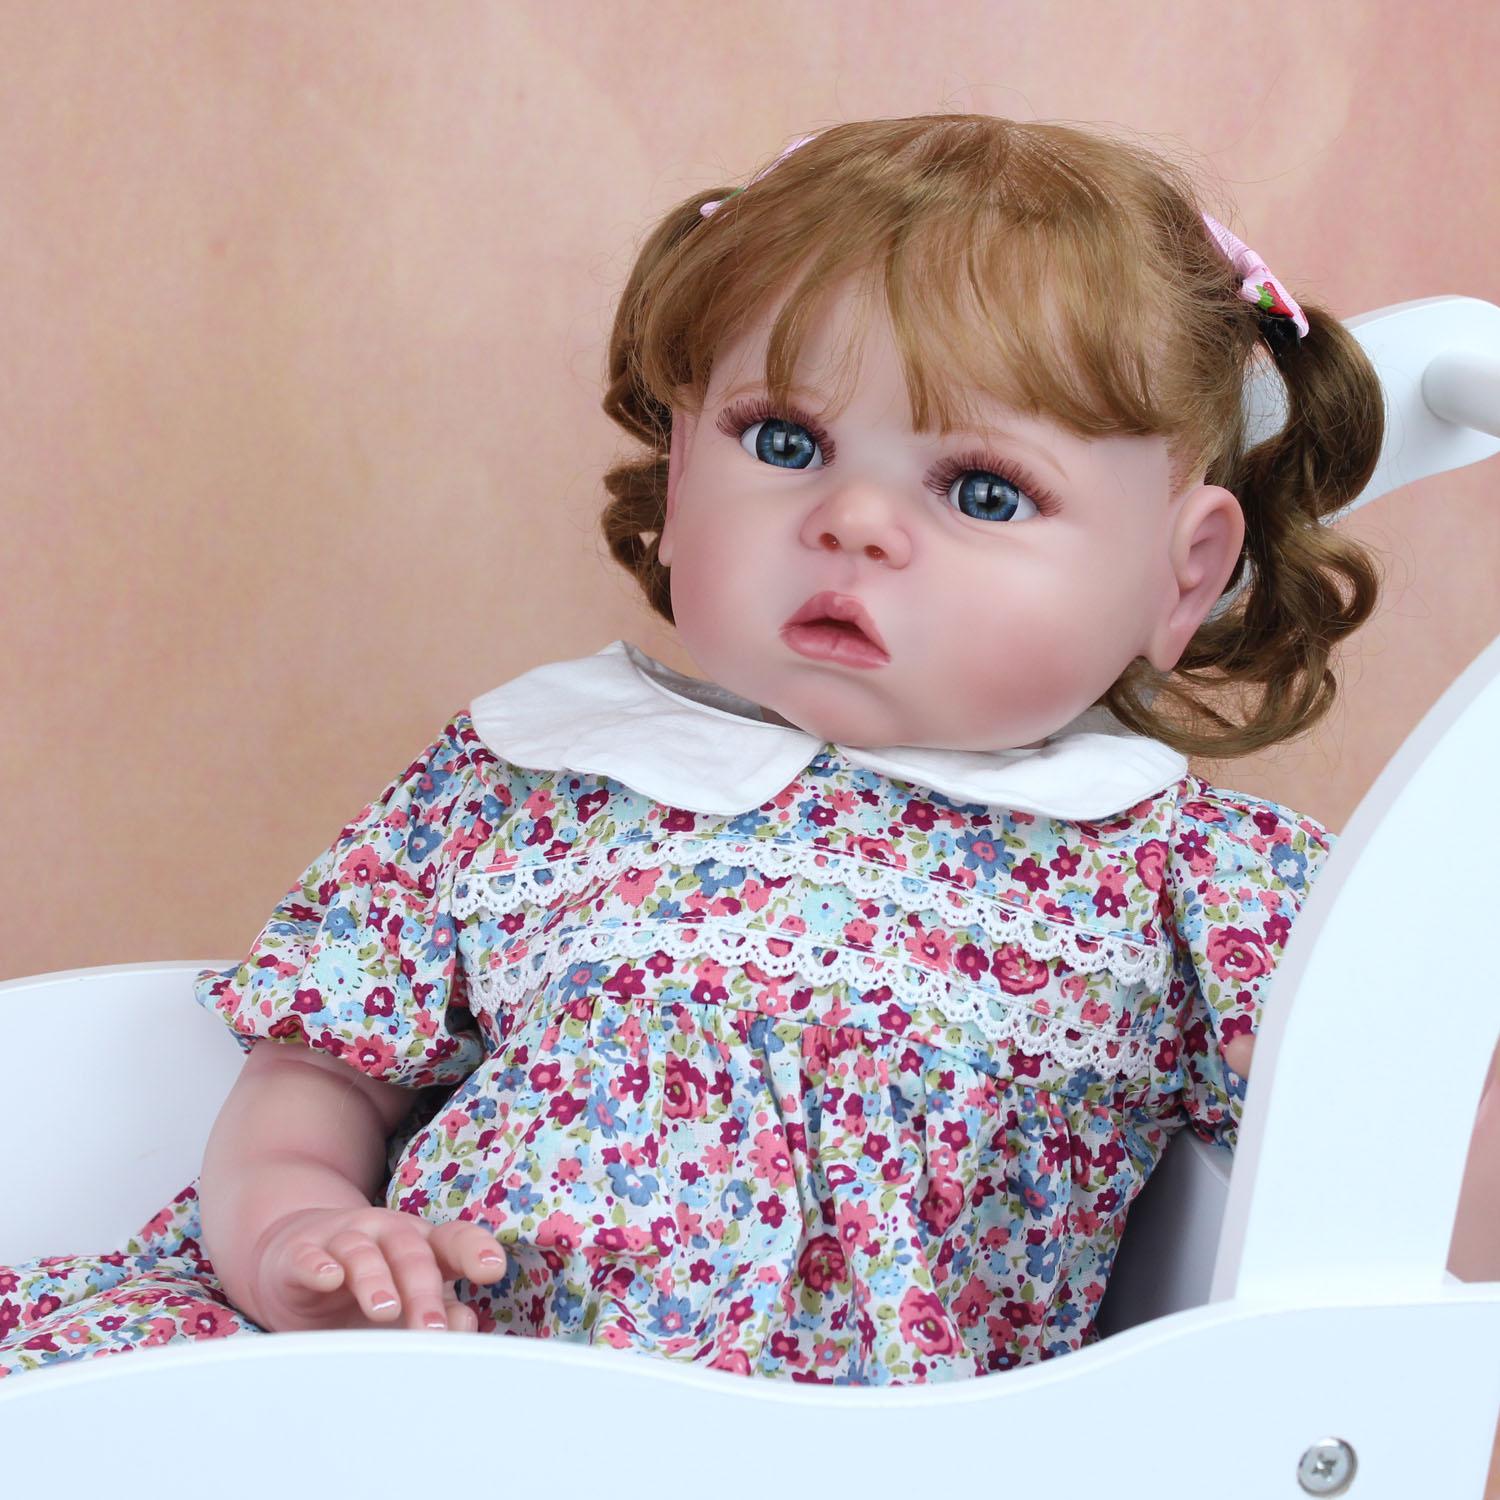 BZDOLL Reborn 3D Paint 65 CM Soft Silicone Reborn Baby Doll Toy For Girl 26 Inch Cloth Body Realistic Long Hair Princess Toddler Art Bebe